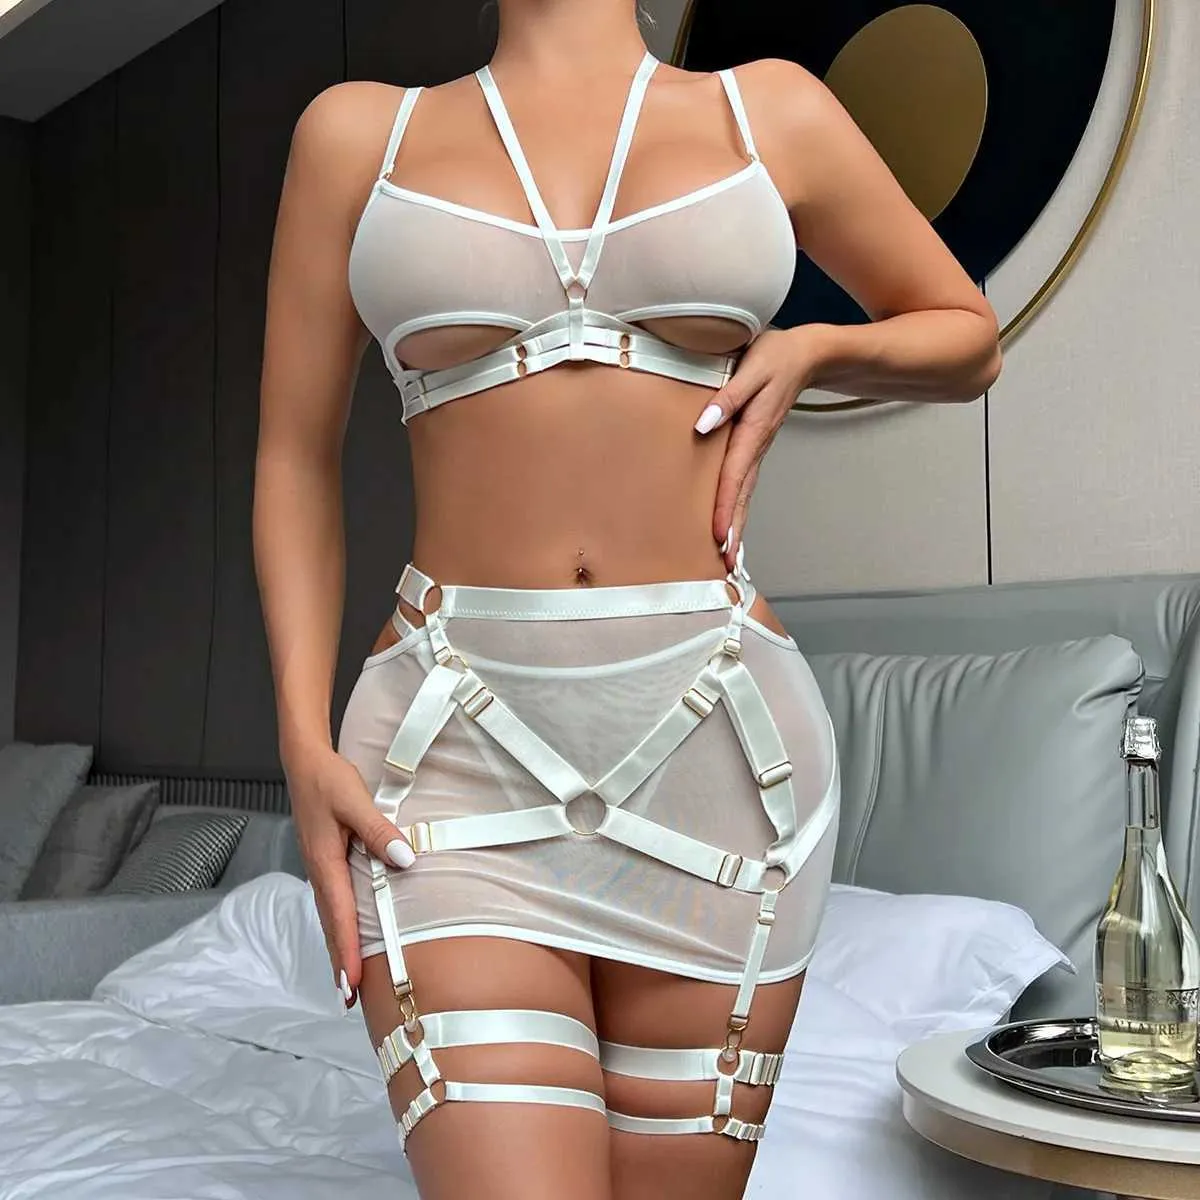 Sexy Set Fine Lingerie Open Bra Sexyunderwear Uncensored Intimate Naked  Woman Without Censorship Sheer Garter Belt Set 230808 From  Siliconevibrators, $15.83